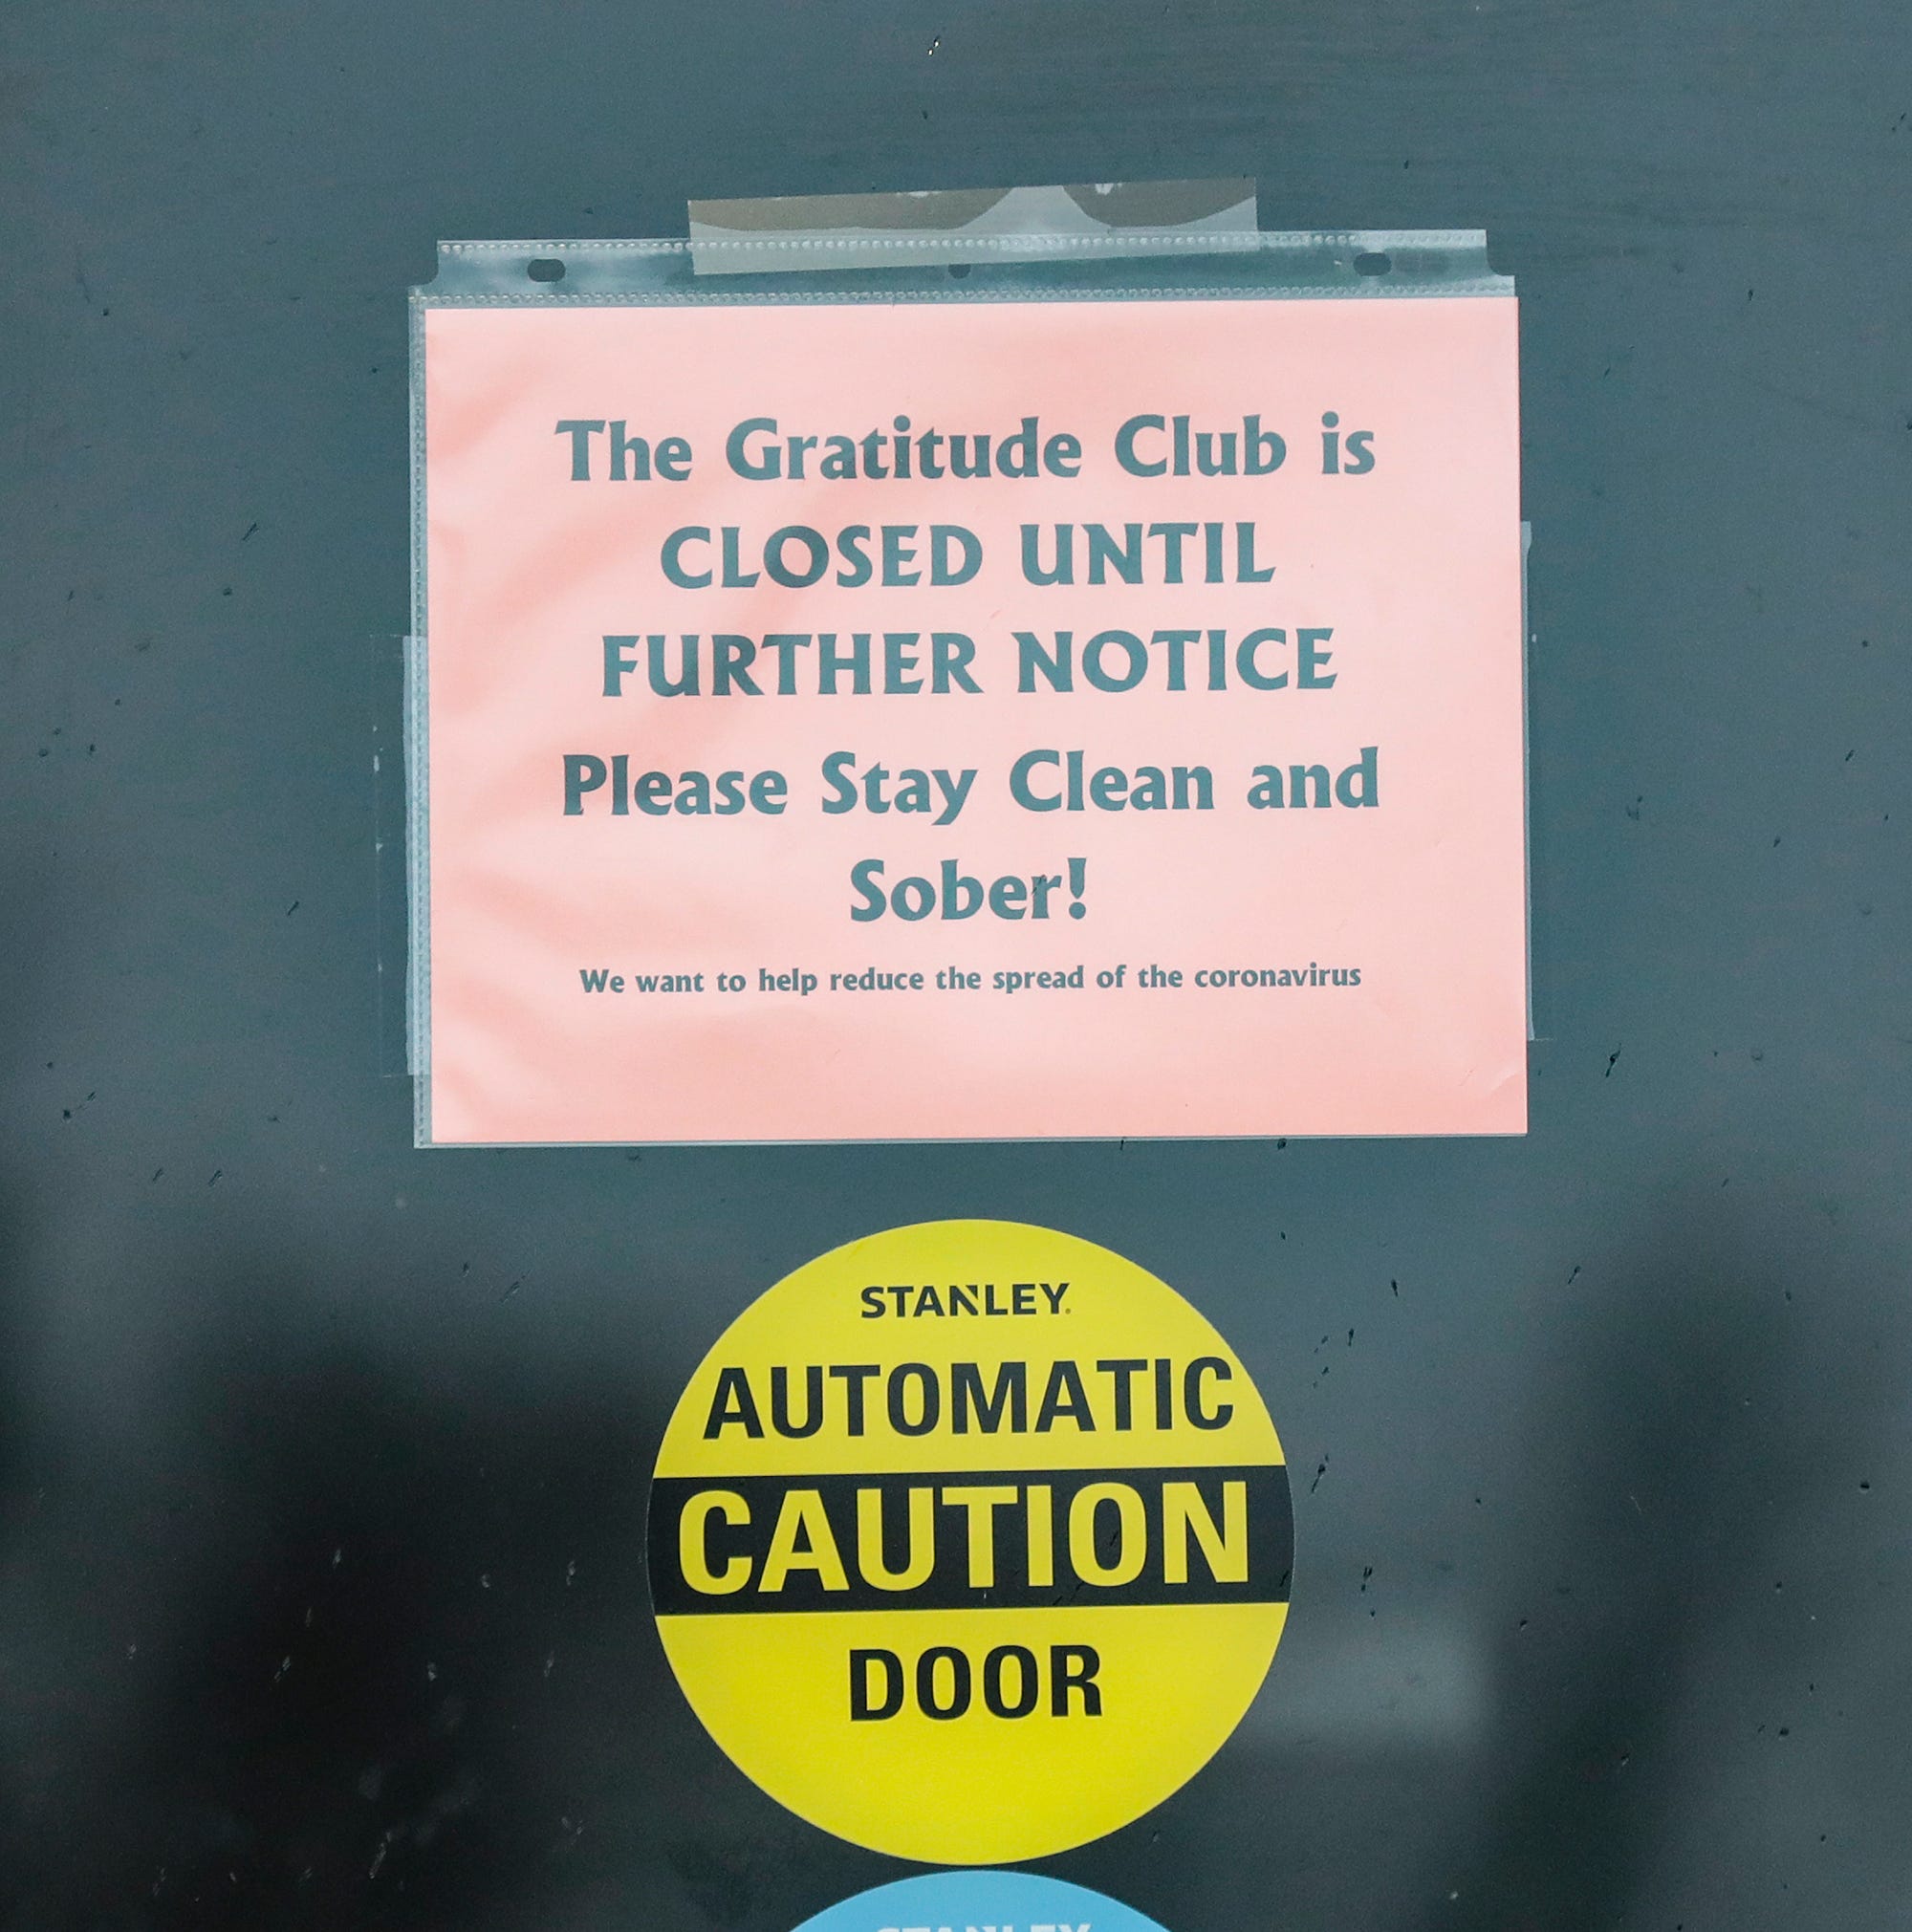 A sign on the Gratitude Club door Thursday, March 19, 2020 in Fond du Lac, Wis. announces it is closed.